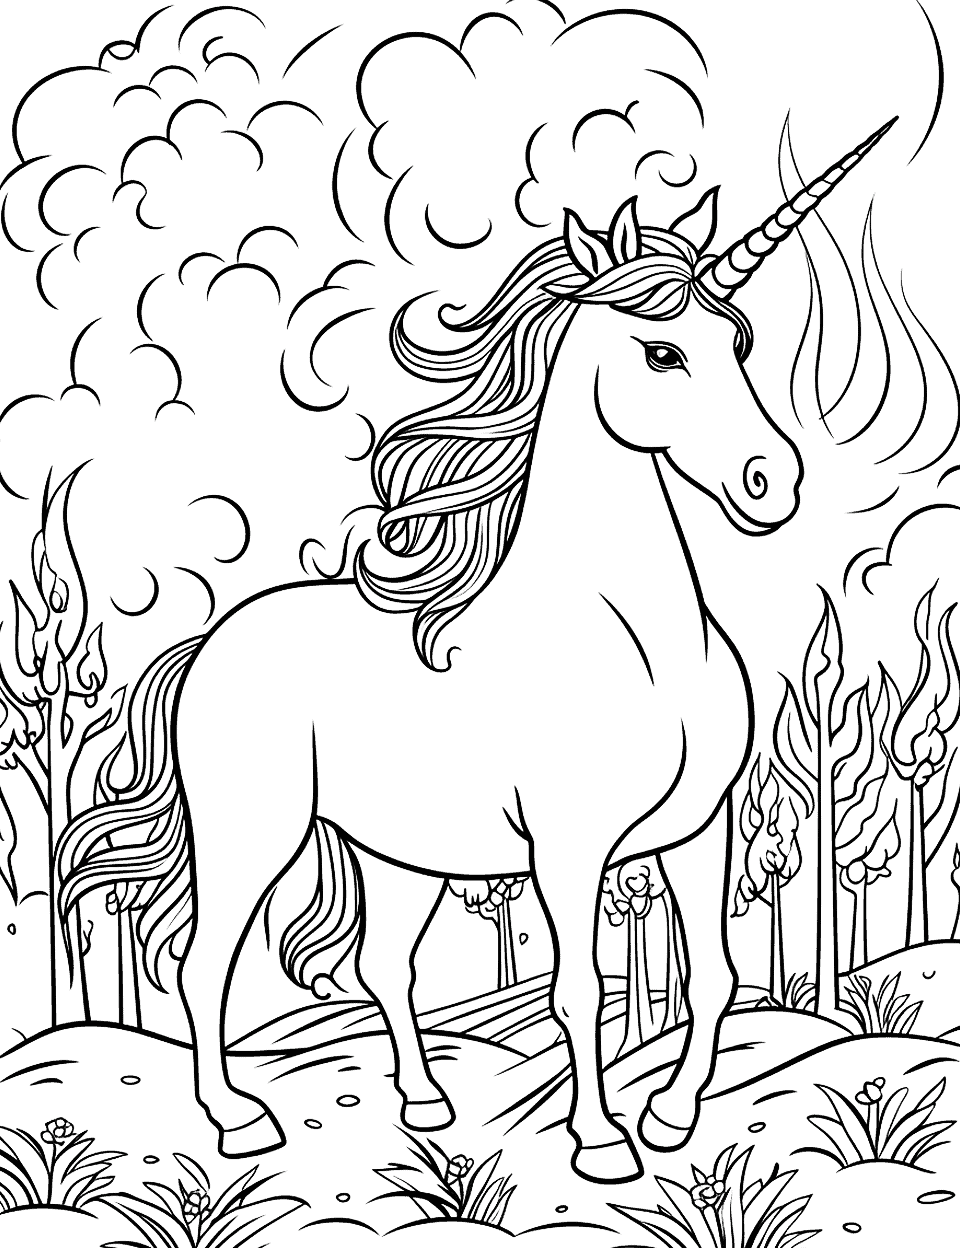 Unicorn in a Forest Fire Coloring Page - A brave unicorn escaping from a forest fire.